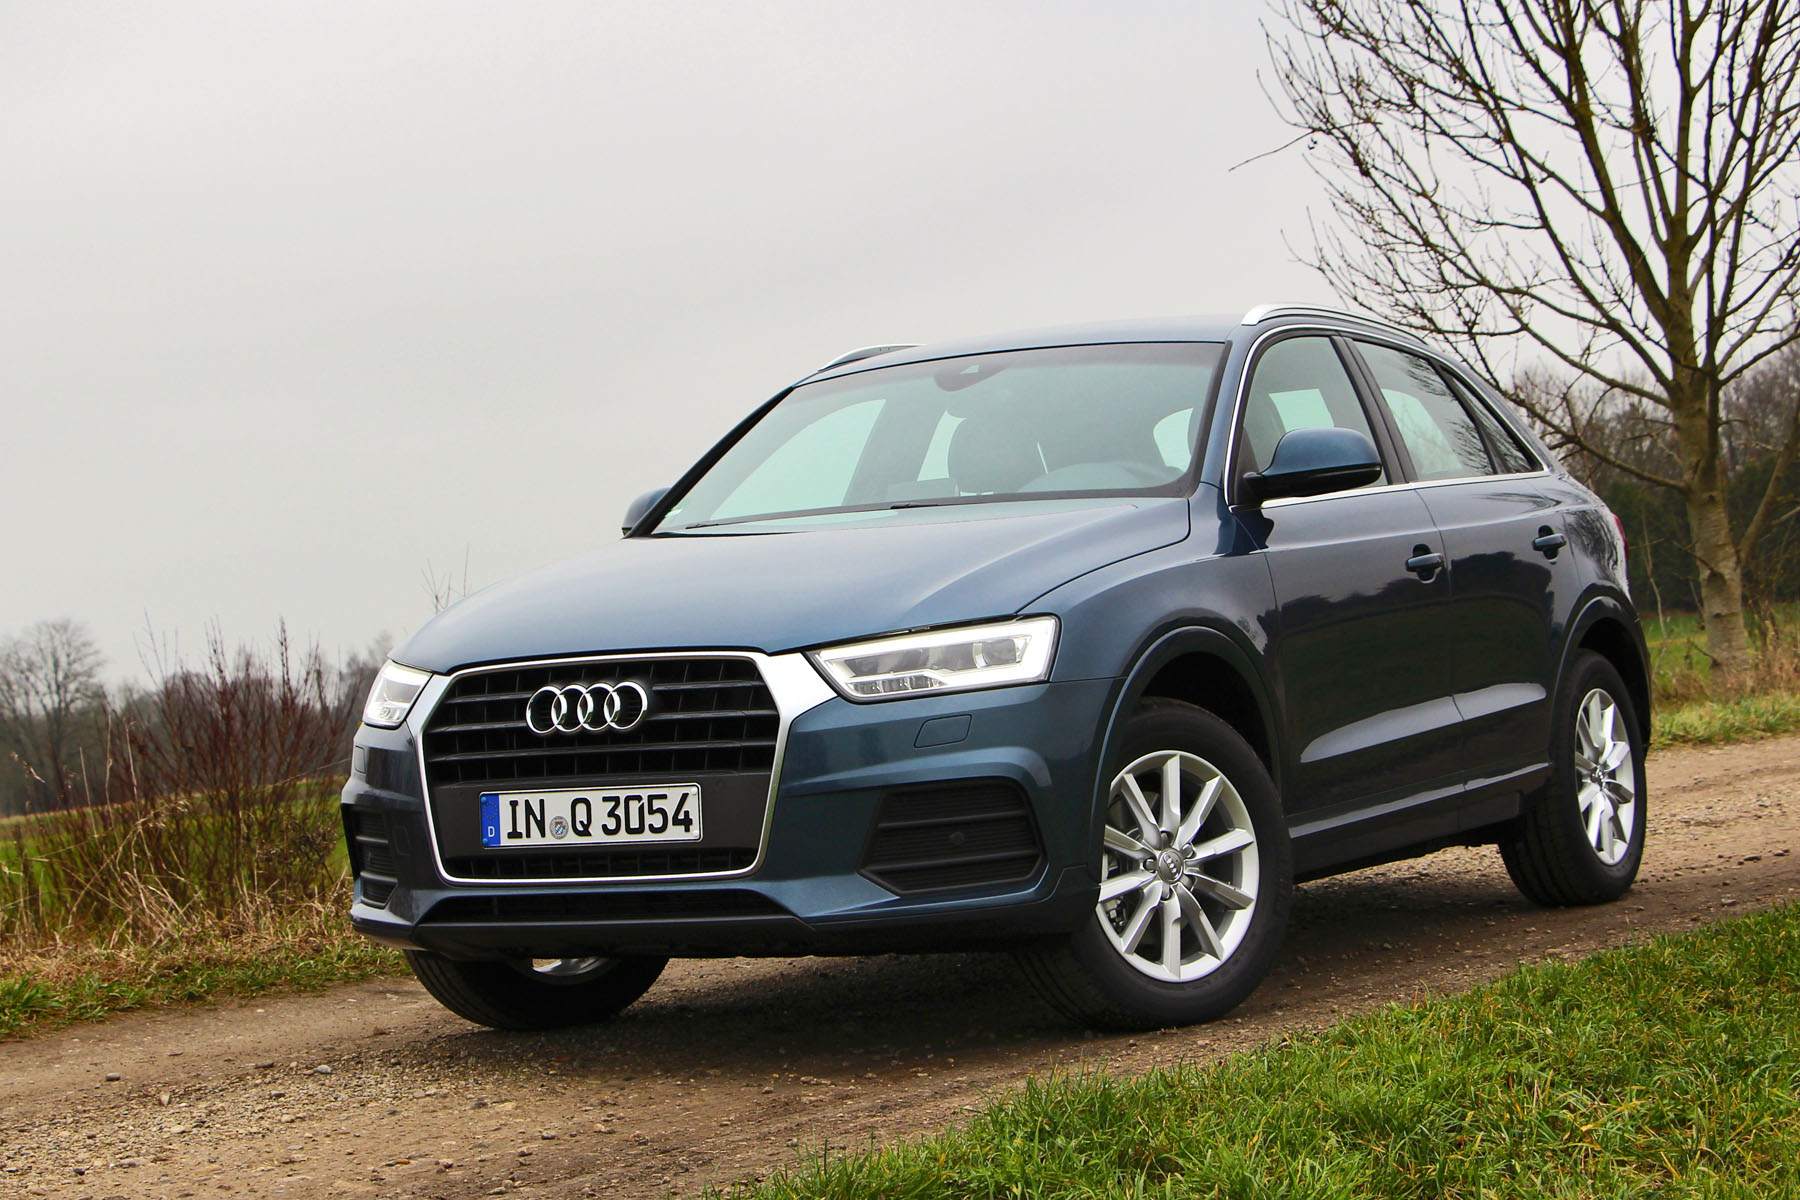 Also over in Europe, Audi offers a selection of up to 11 powertrains, with a variety of  diesels and gasoline turbos and manual or automatic transmissions. This one was the basic 2.0L diesel, and as efficient as it might be, was a tad sluggish for our tastes.